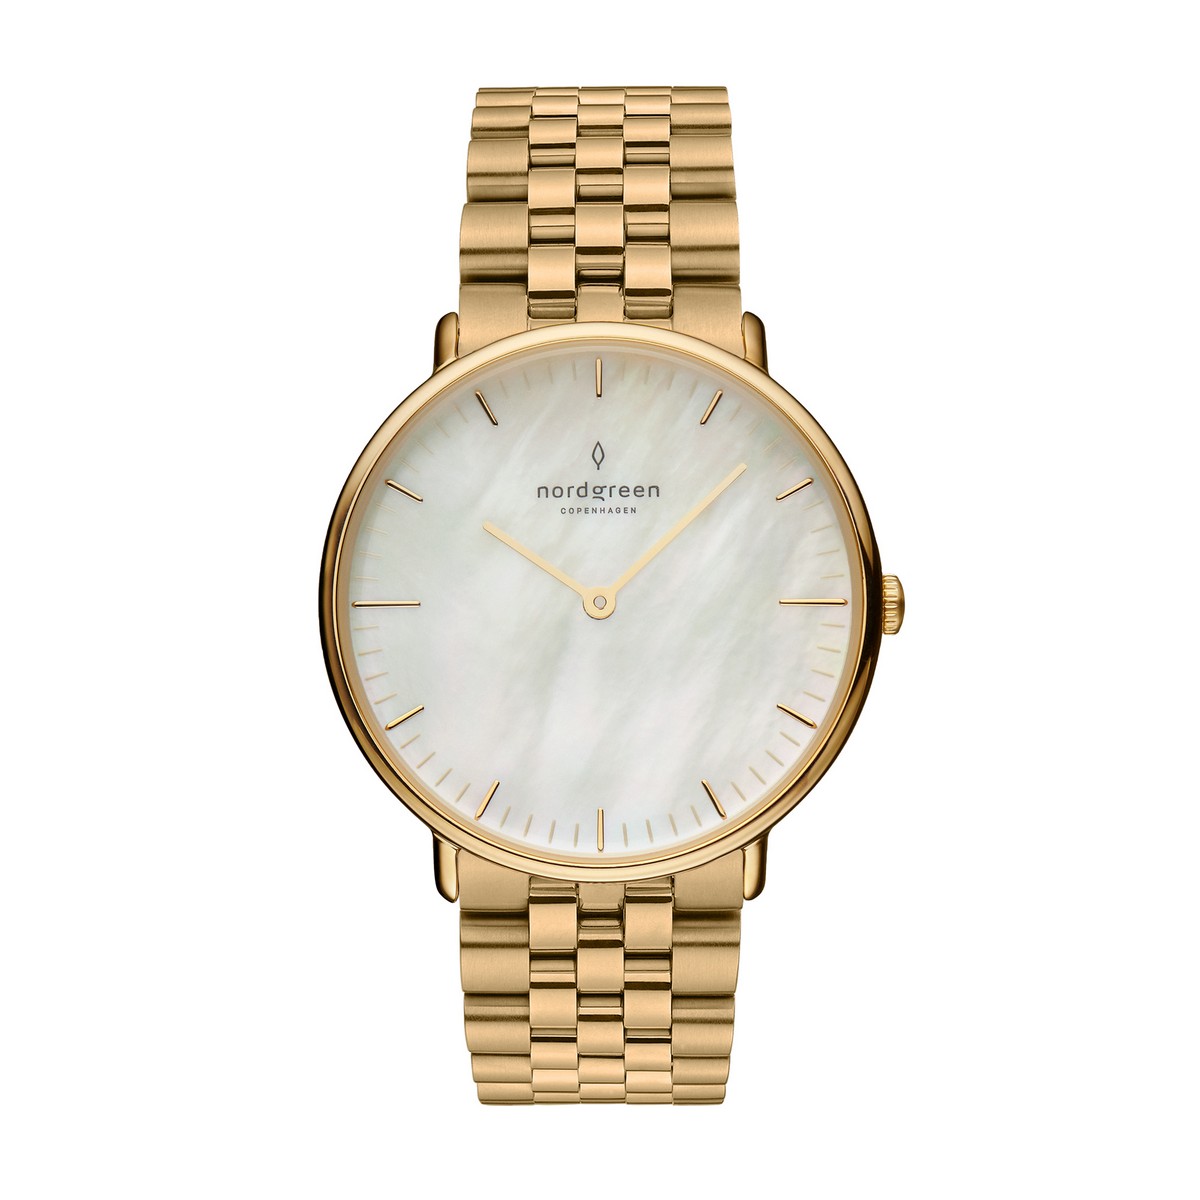 Nordgreen – Native 28mm Gold Mother of Pearl Dial with Gold 5-Link Watch Strap